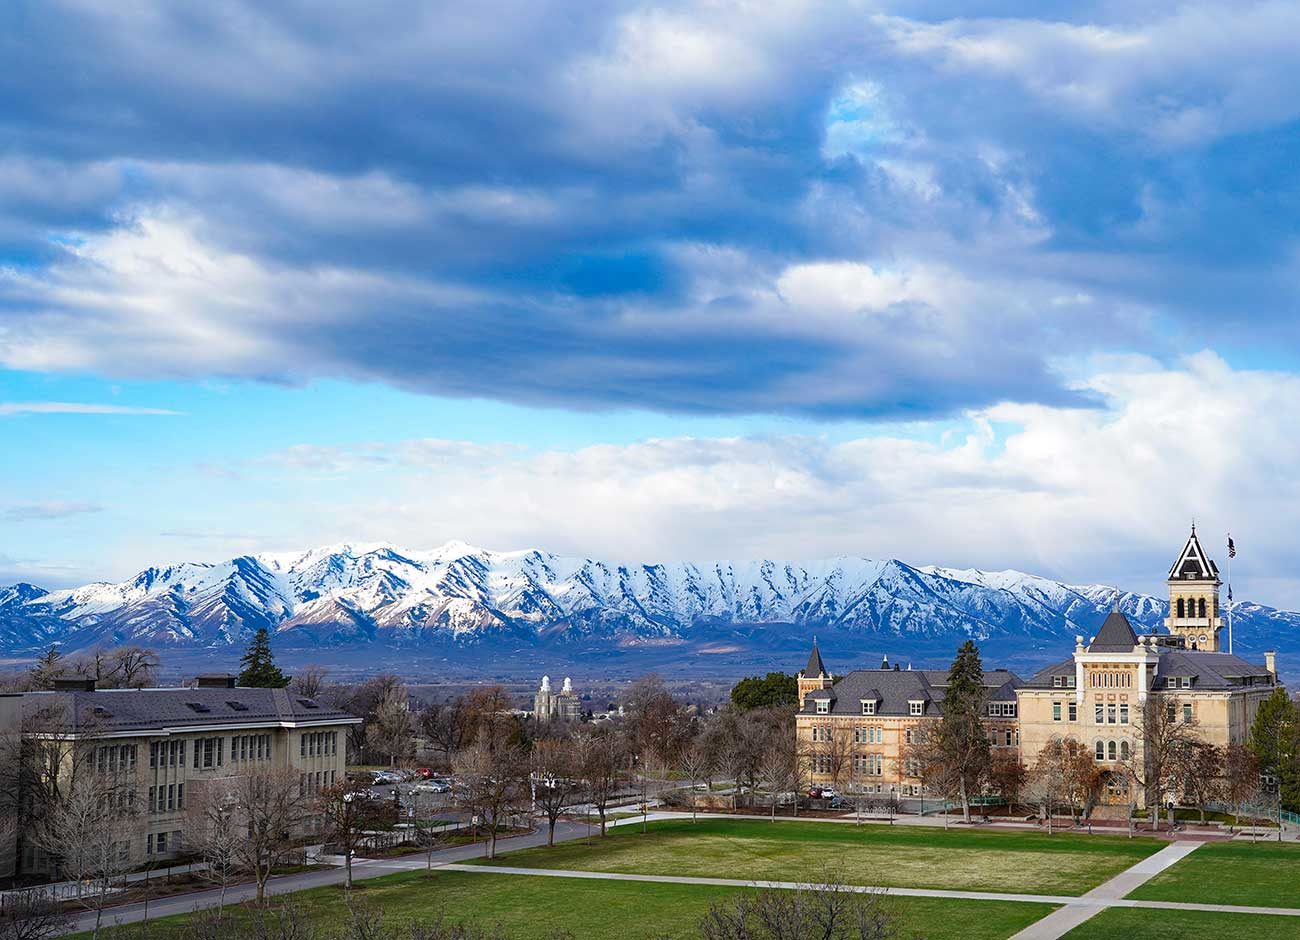 snow-capped mountains flank an empty campus quad.